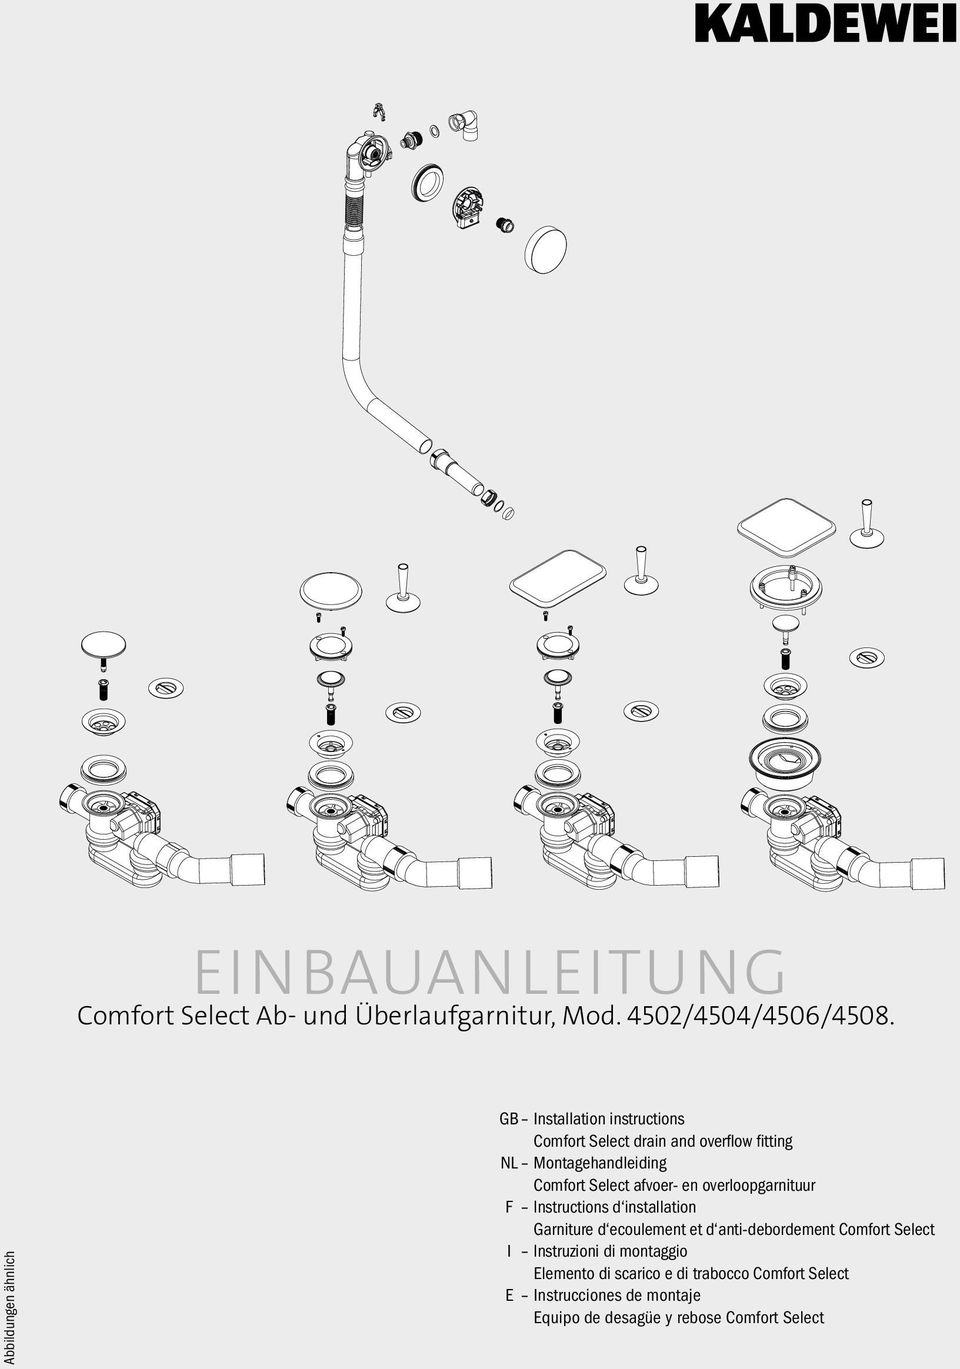 GB Installation instructions GB Installation instructions Comfort Select drain and overflow fitting Comfort Select drain and overflow fitting NL Montagehandleiding NL Montagehandleiding Comfort